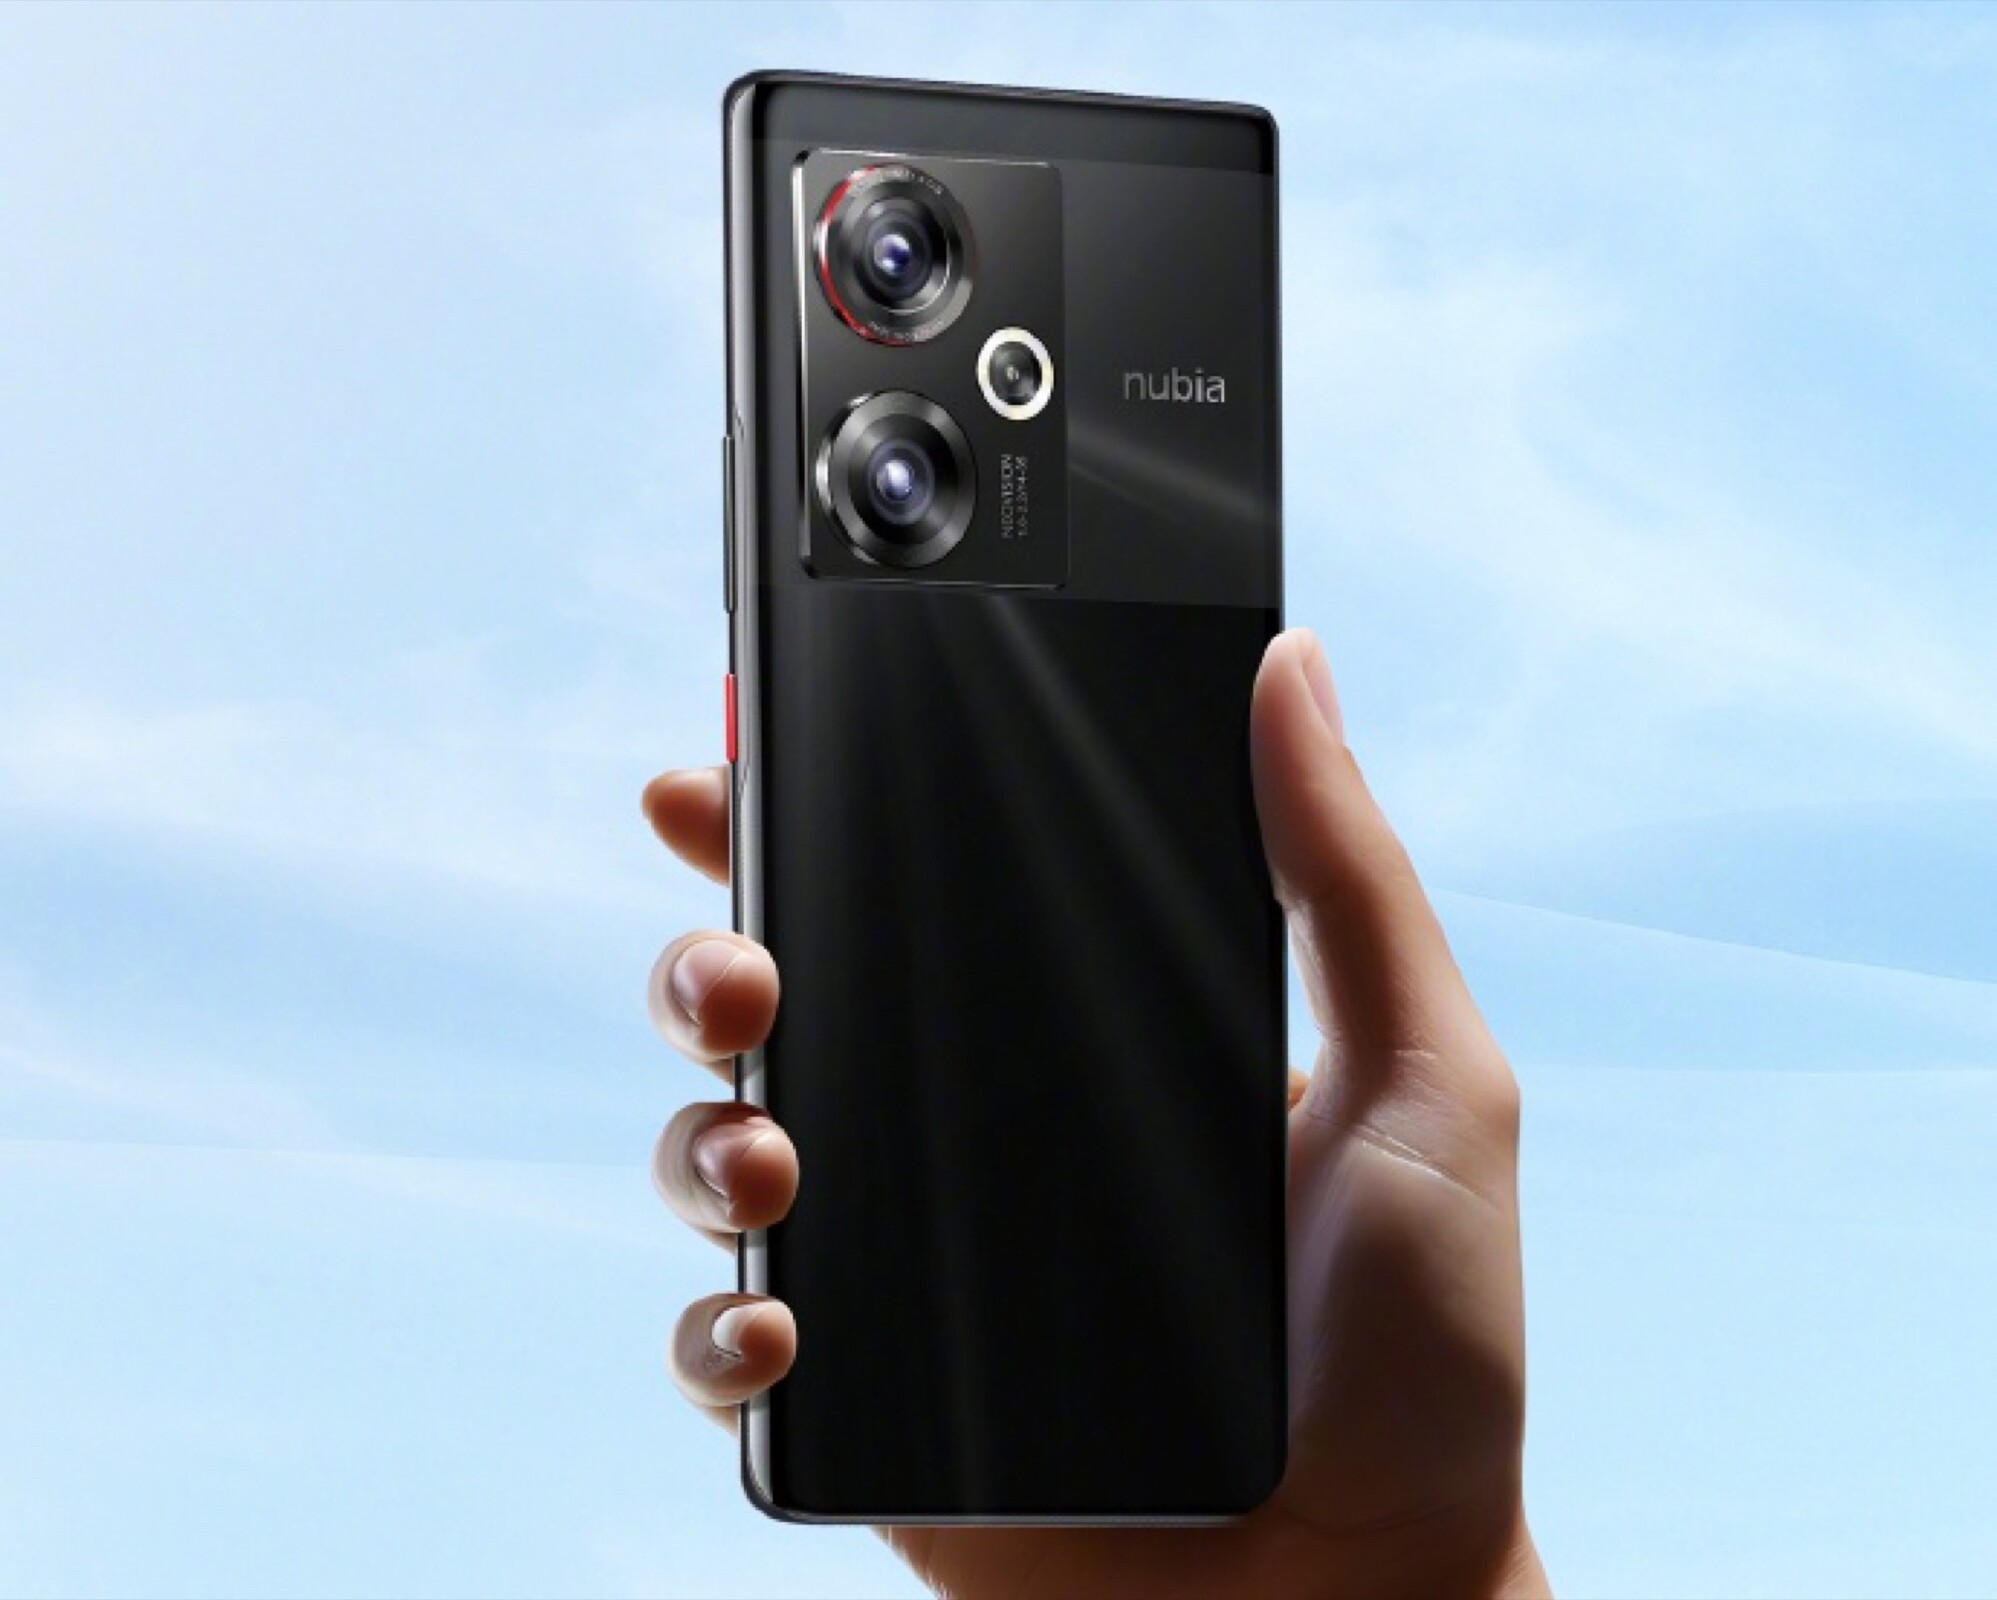 Nubia Z60 Ultra: Android smartphone with multi-camera design update exposed  in new leak -  News